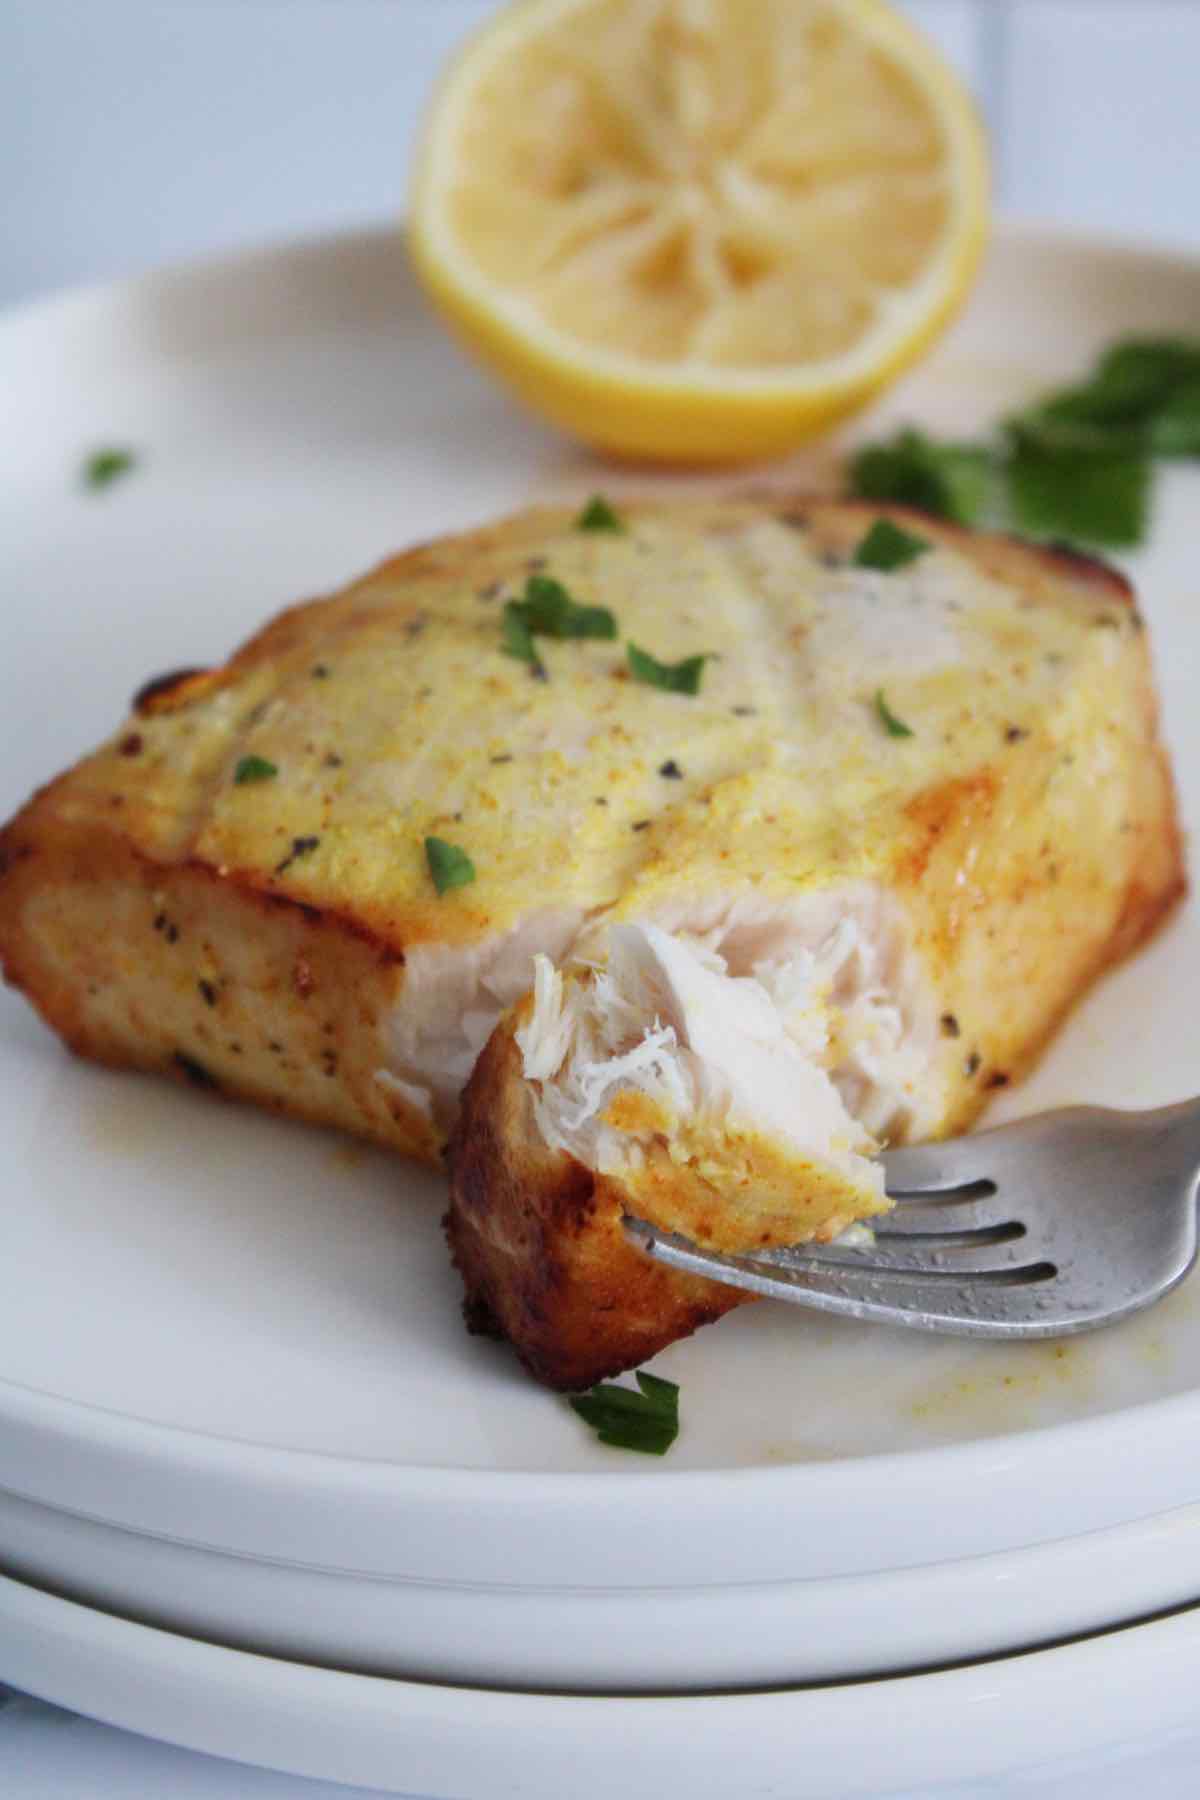 This air fryer swordfish steak recipe was cooked to well done. Reduce the cooking time for medium to medium well.